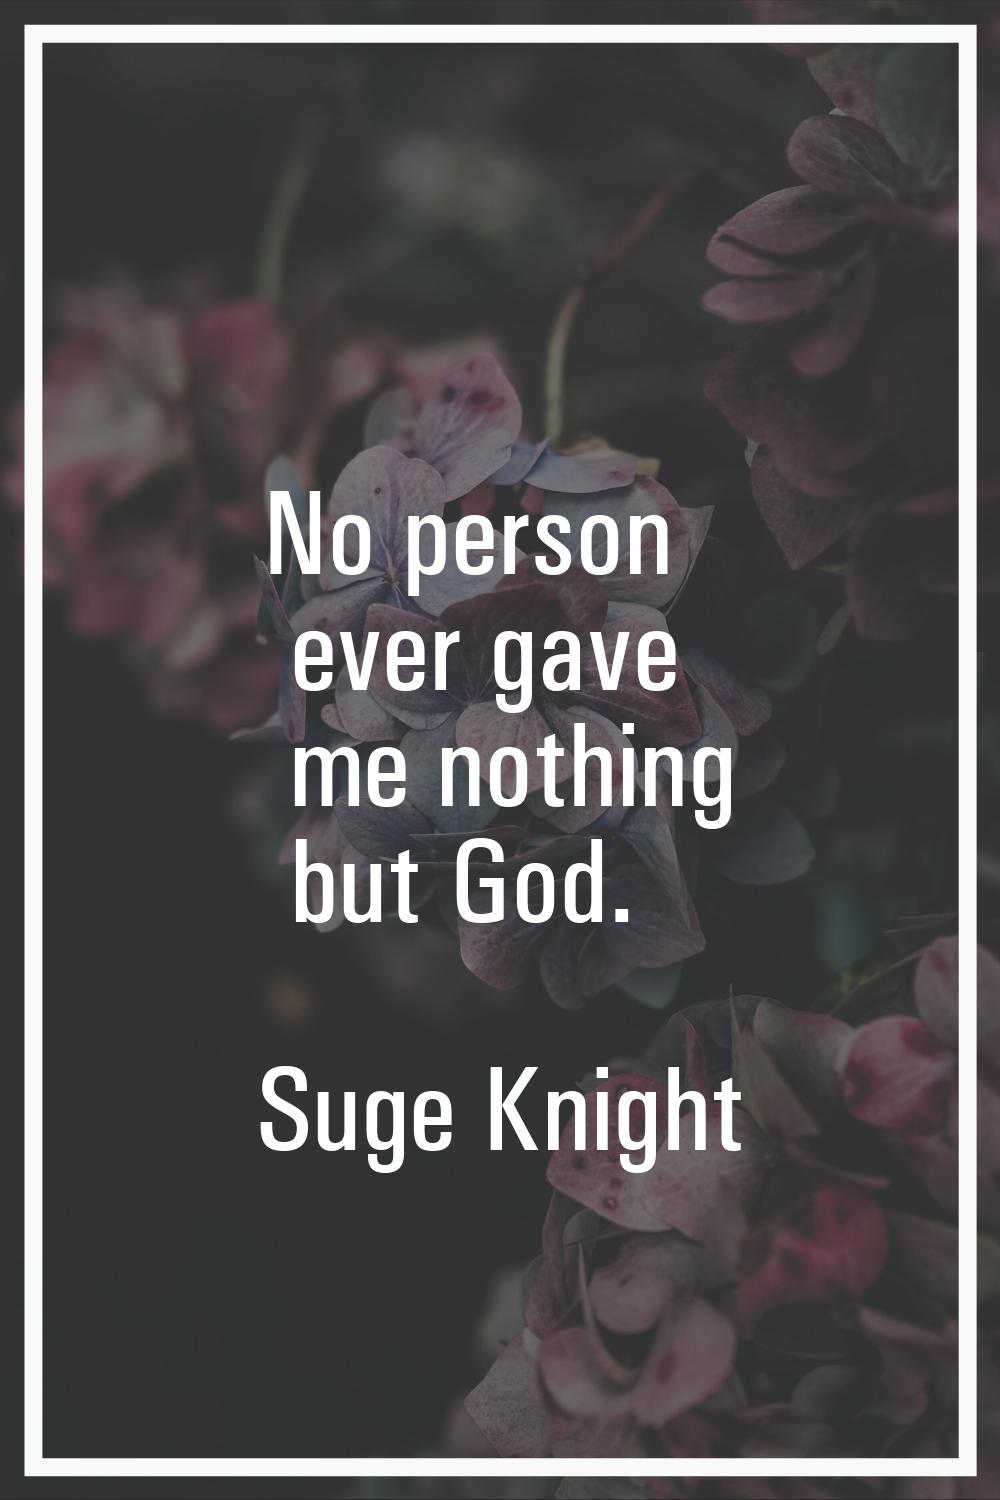 No person ever gave me nothing but God.